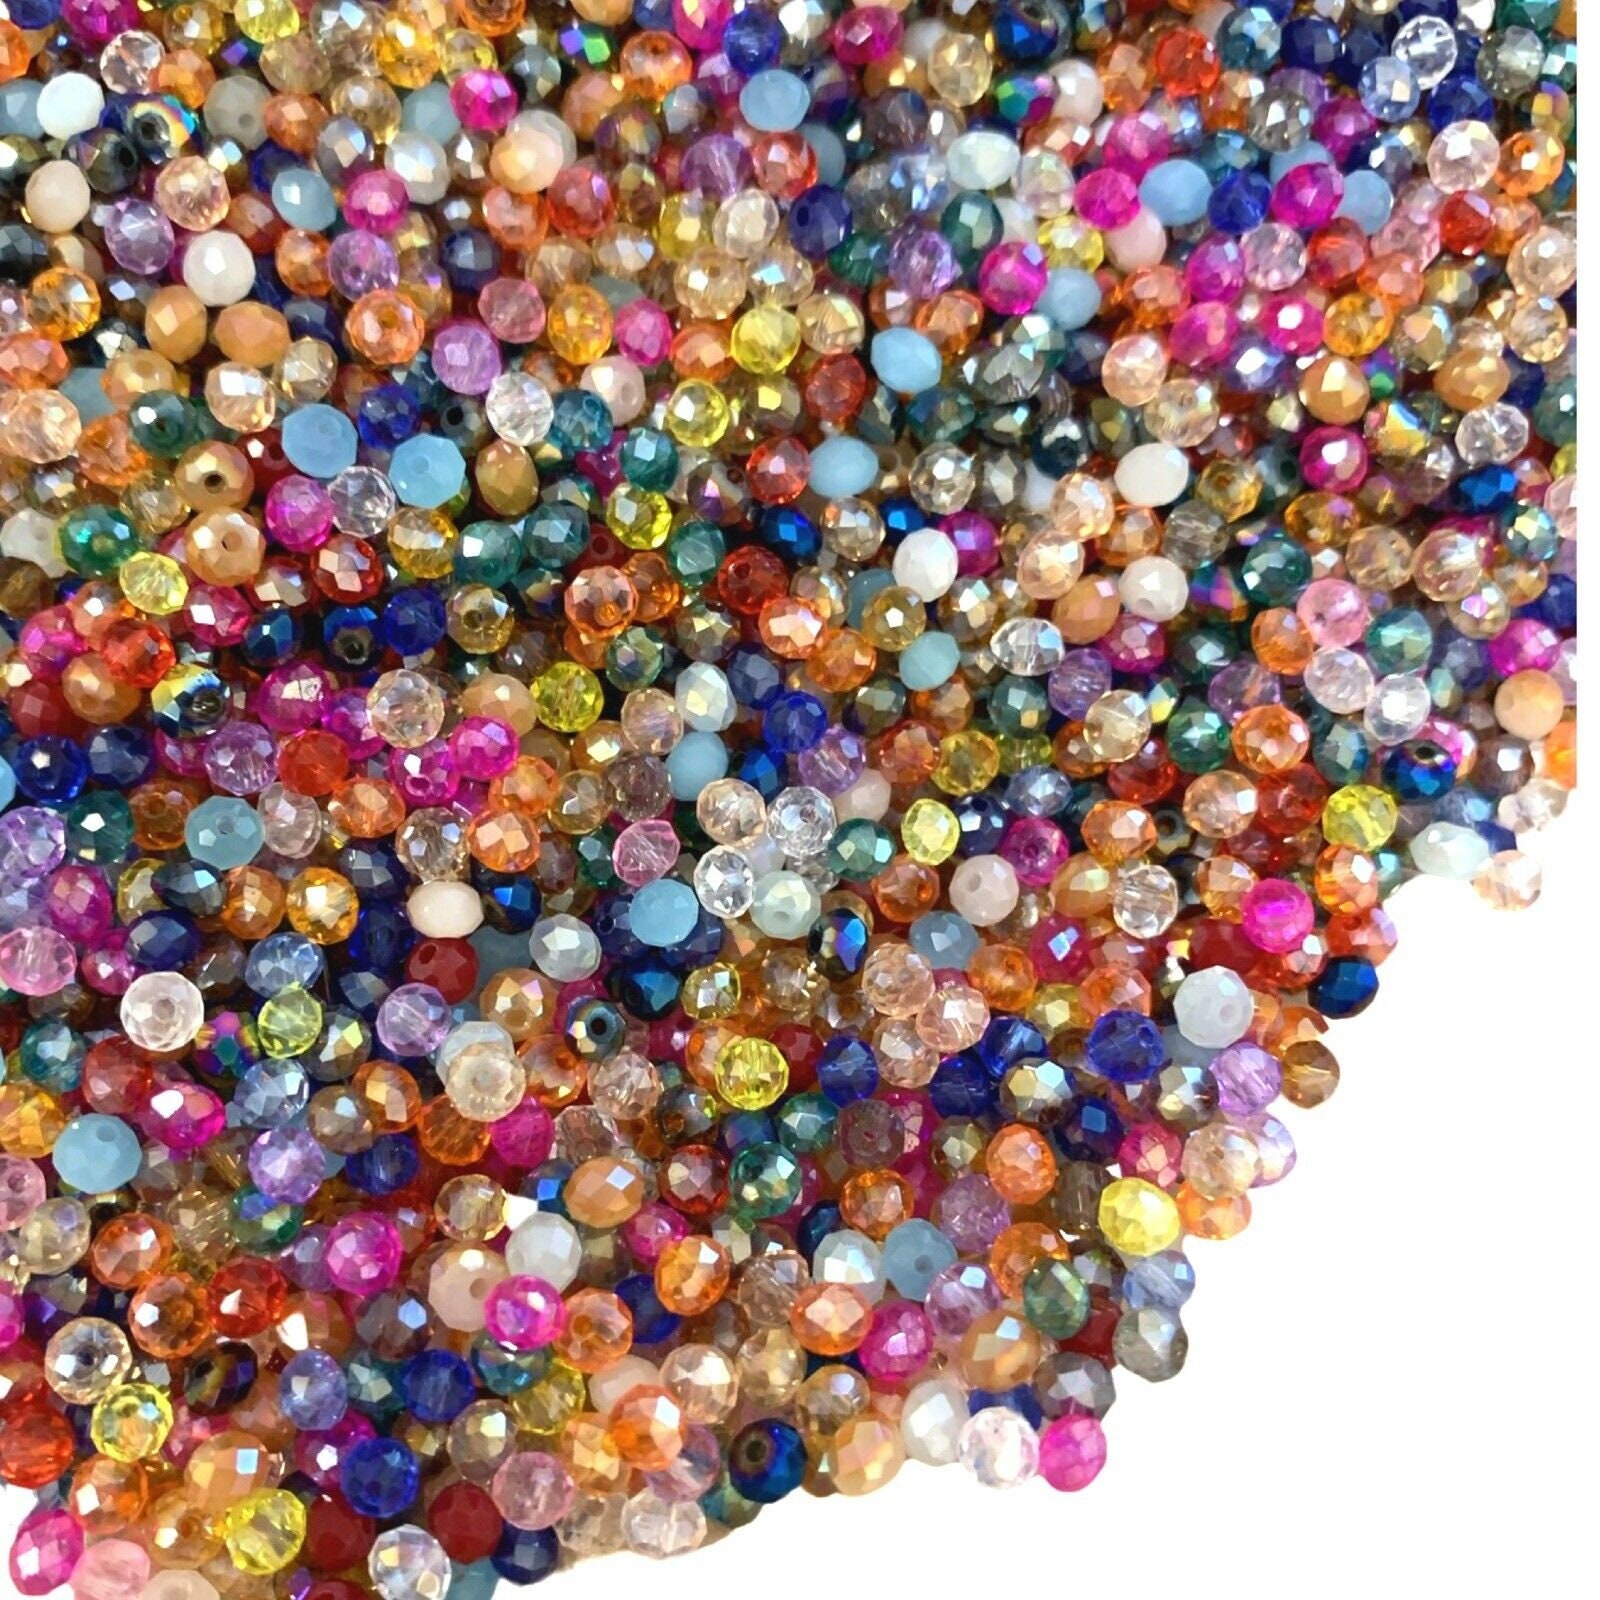 Glass Beads 500g / 1kg Mixed Crystal Bead Mix 4mm to 30mm Round